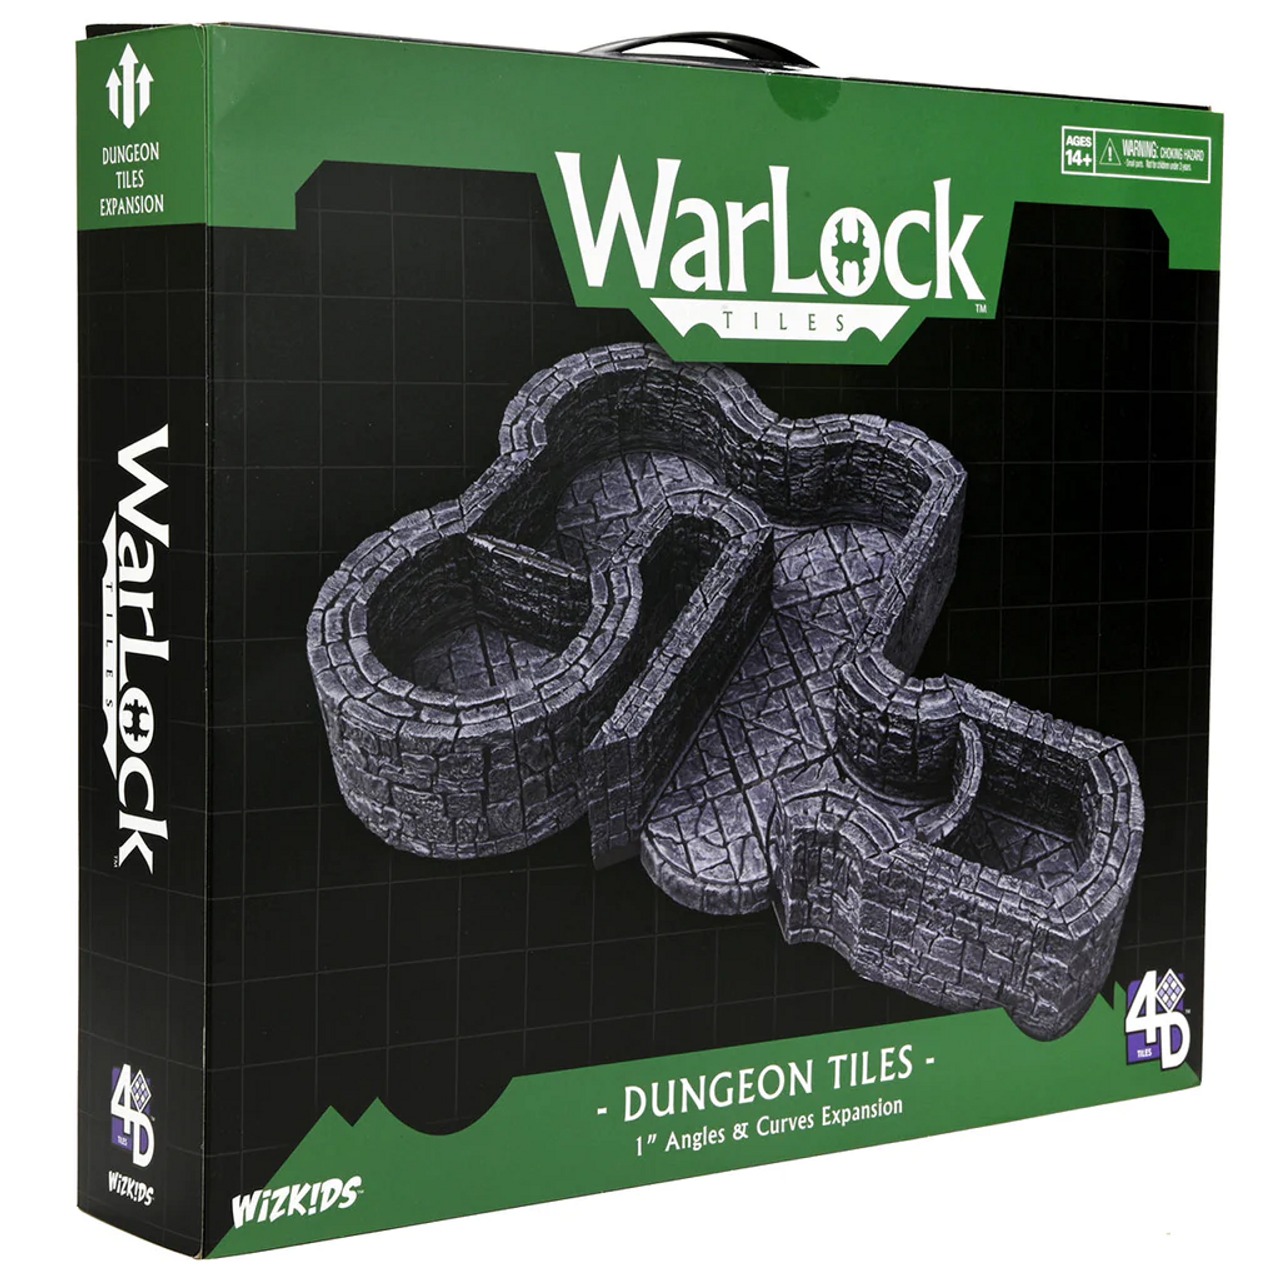 WizKids Dungeons & Dragons WarLock Tiles Expansion Pack 1 in Dungeon Angles & Curves